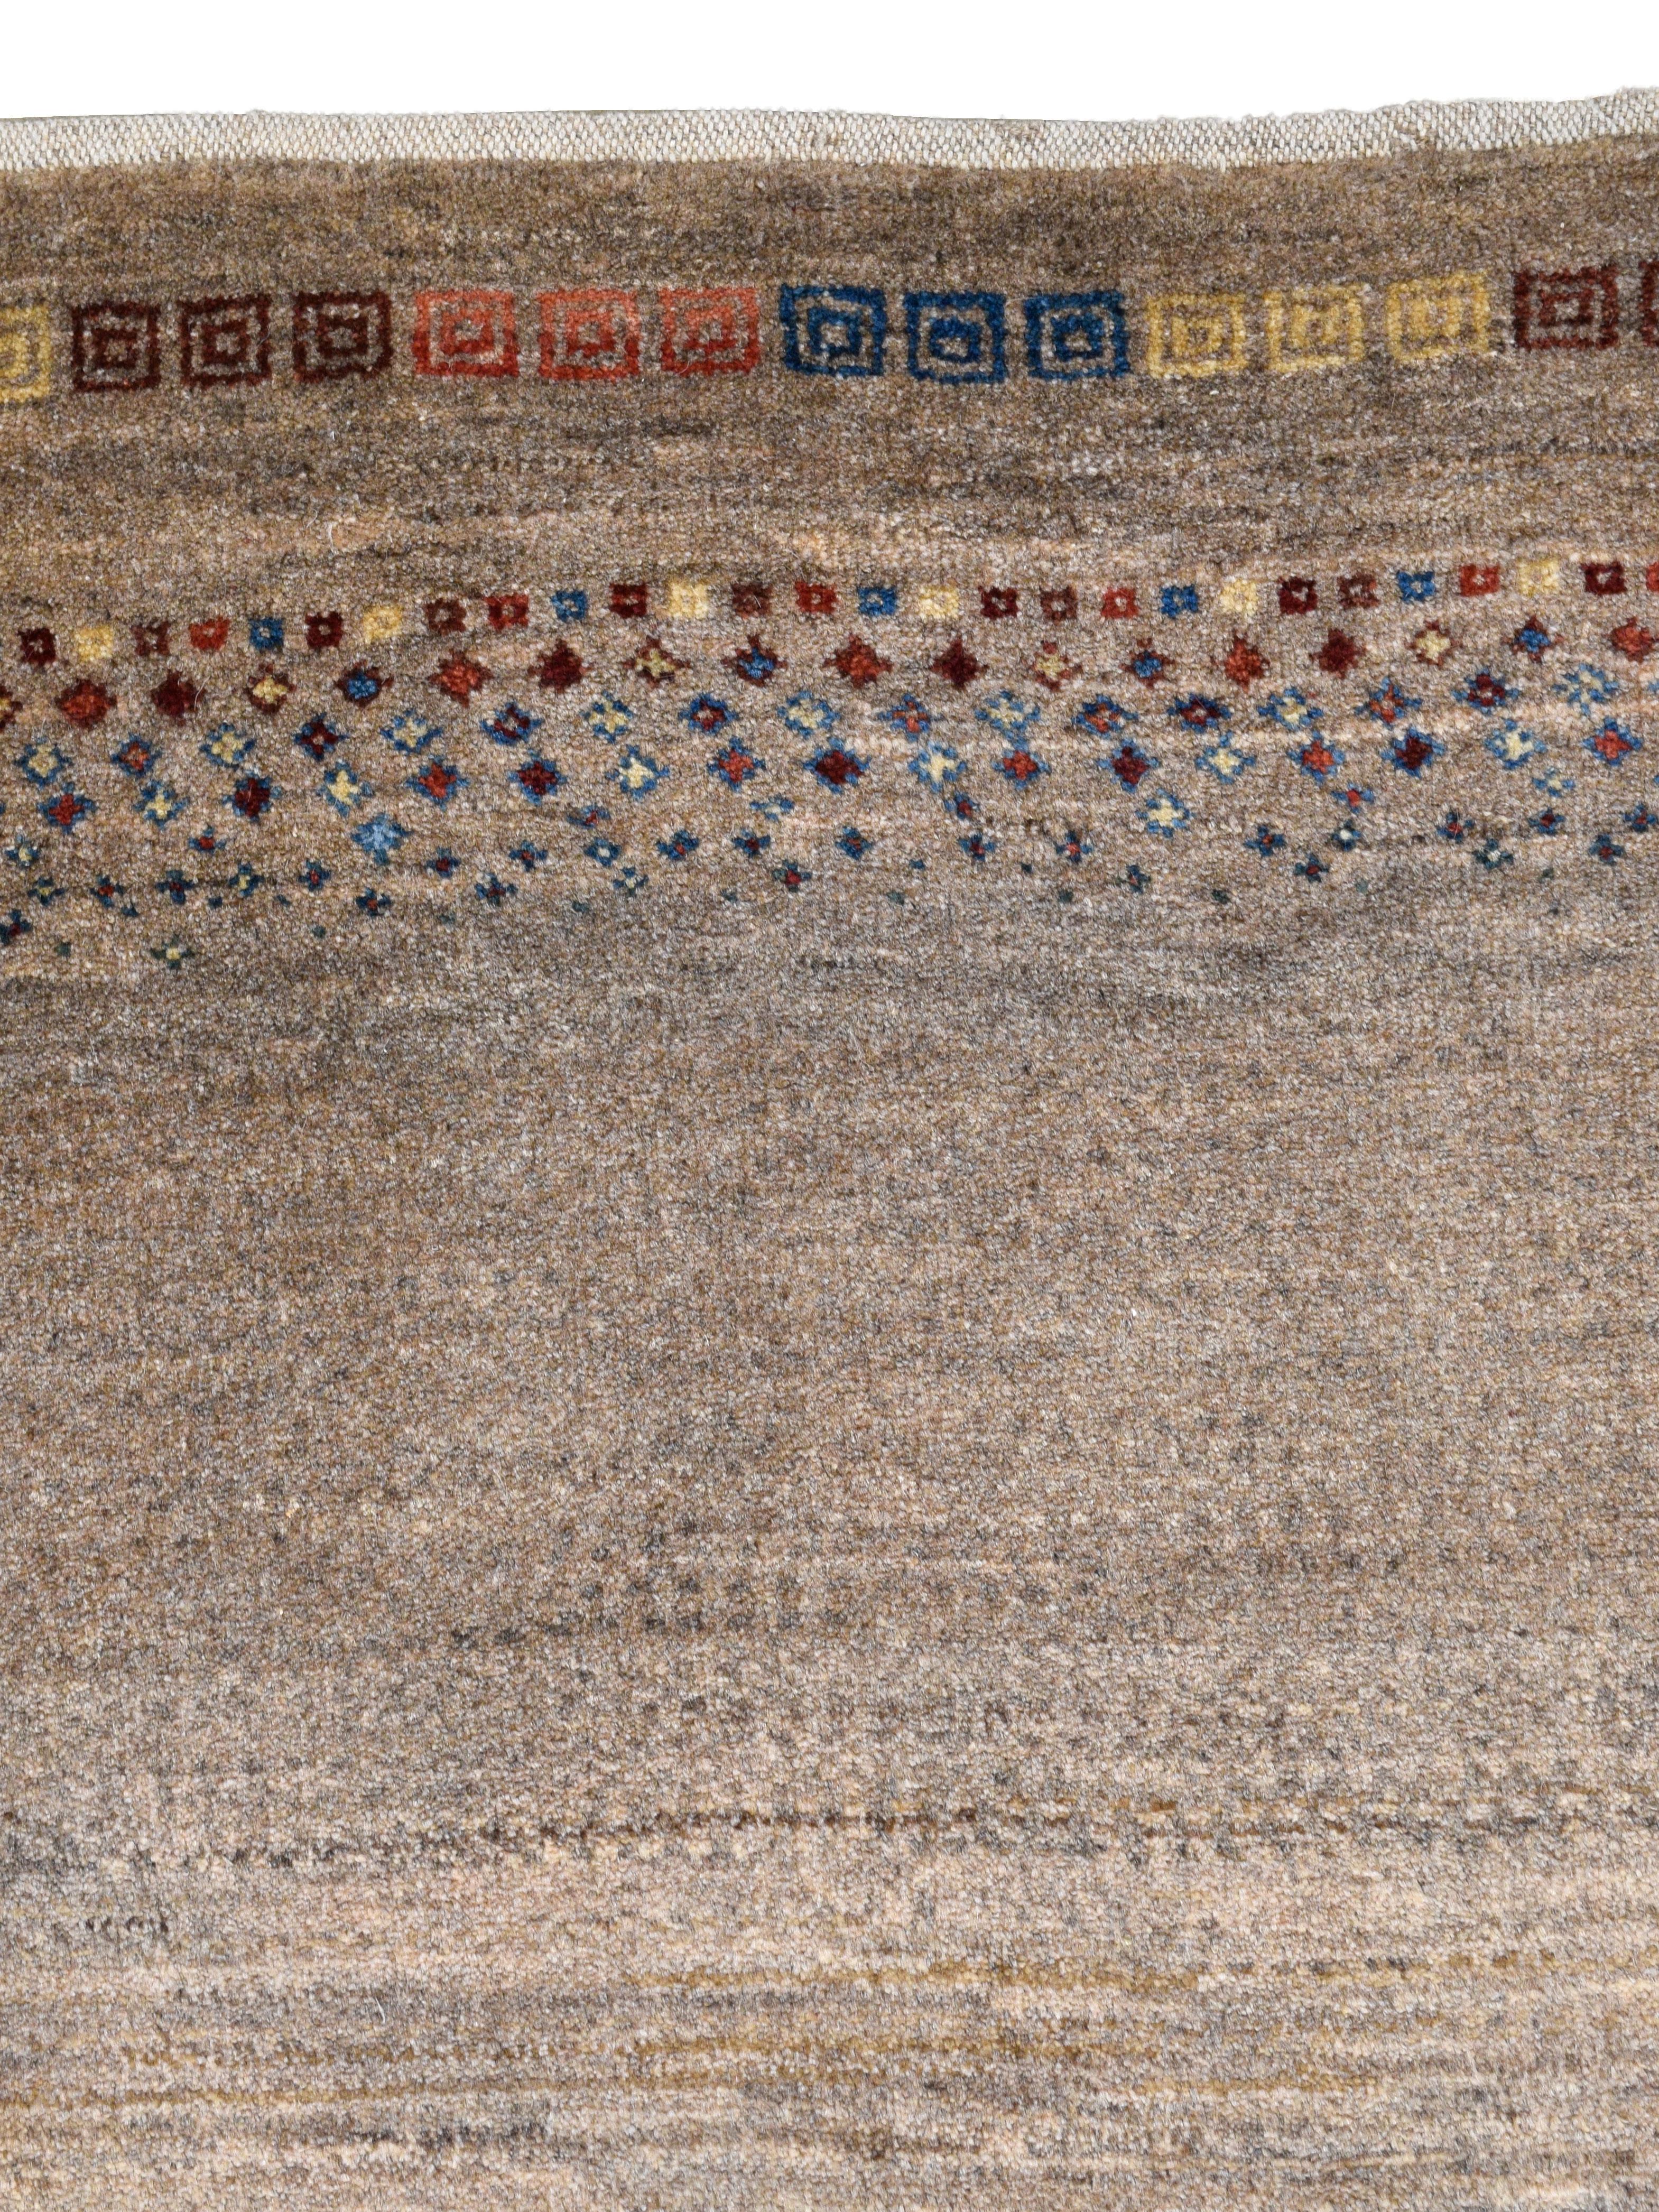 Tribal Neutral Persian Gabbeh Rug in Brown, Taupe, Gold, Red, Blue, Orange Wool, 4'x7' For Sale